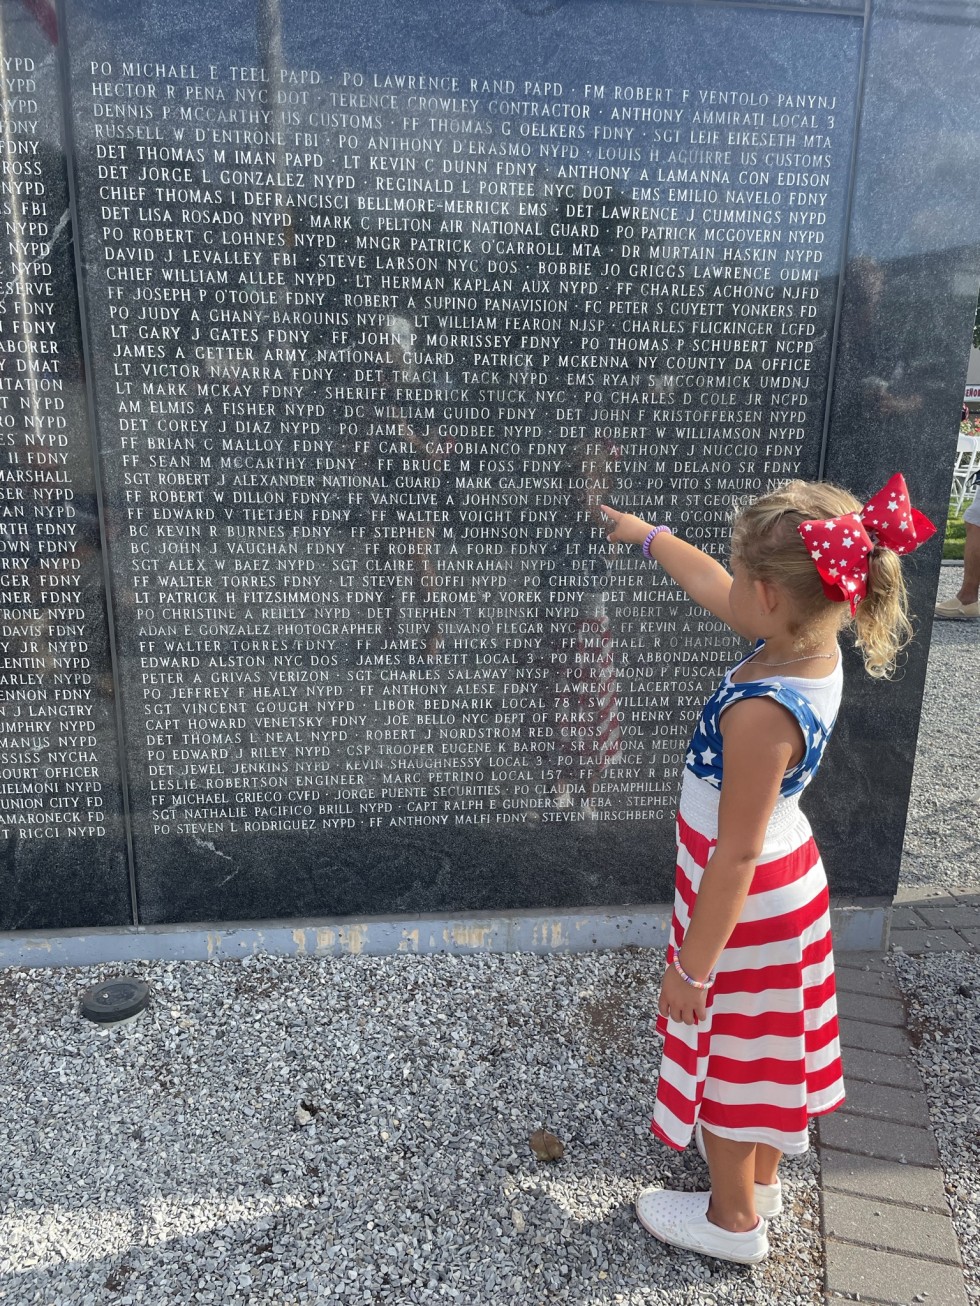 Names Added to the 9-11 Wall